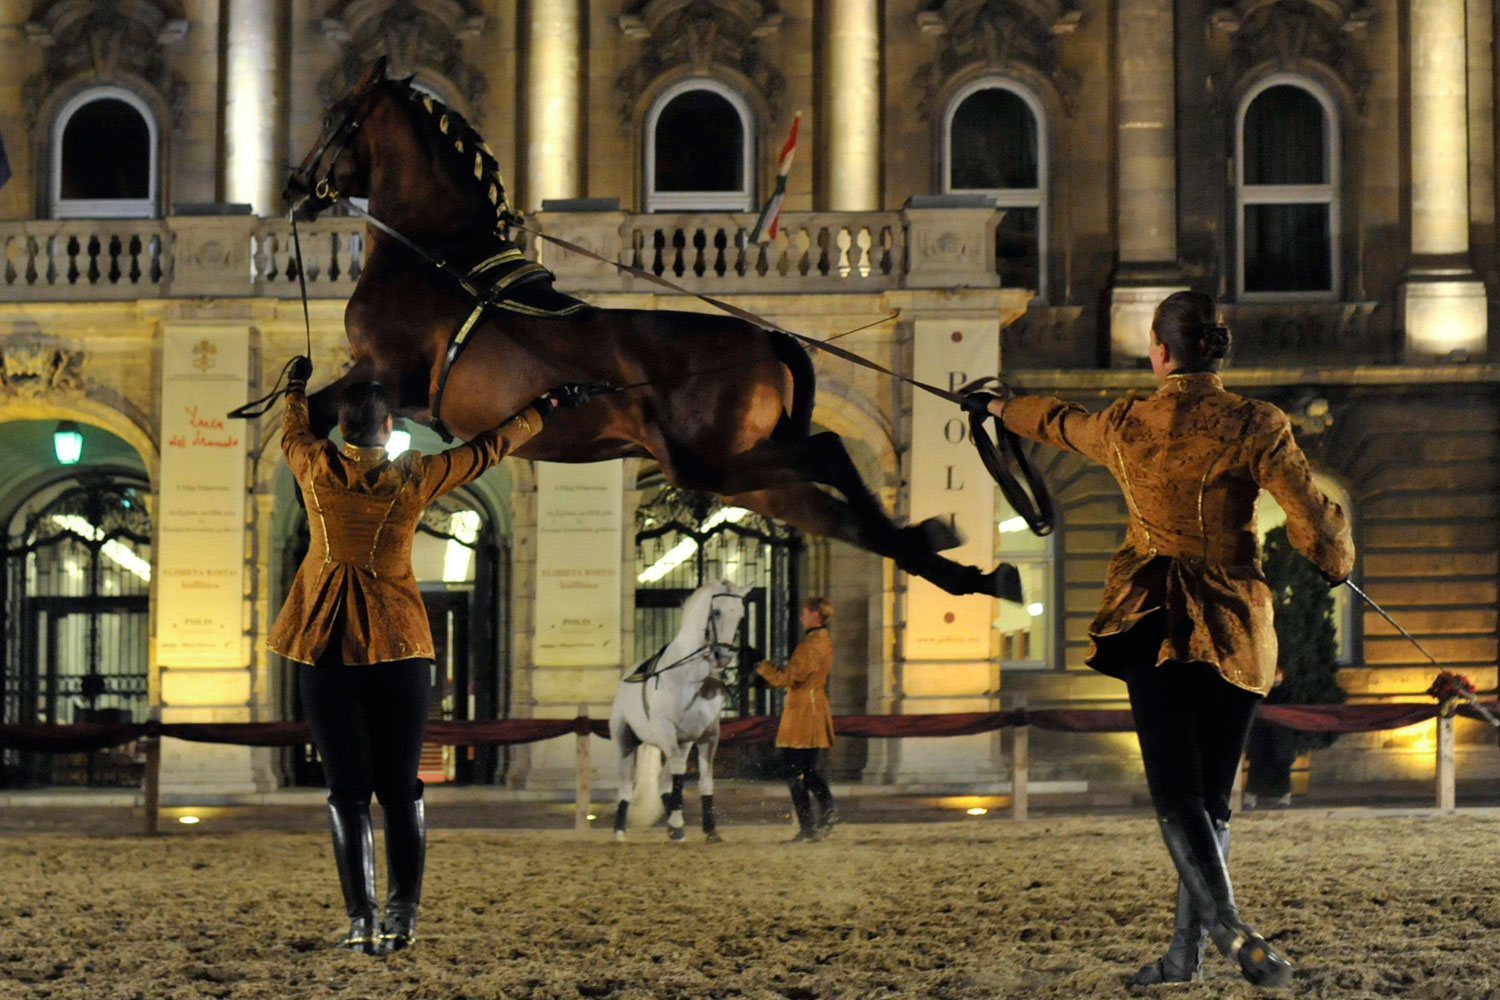 May 7, 2011.  Both equine and human members of Europe’s Epona Spanish Riding School perform in Budapest. The school was honoring the Royal Guards of Hungary’s past.